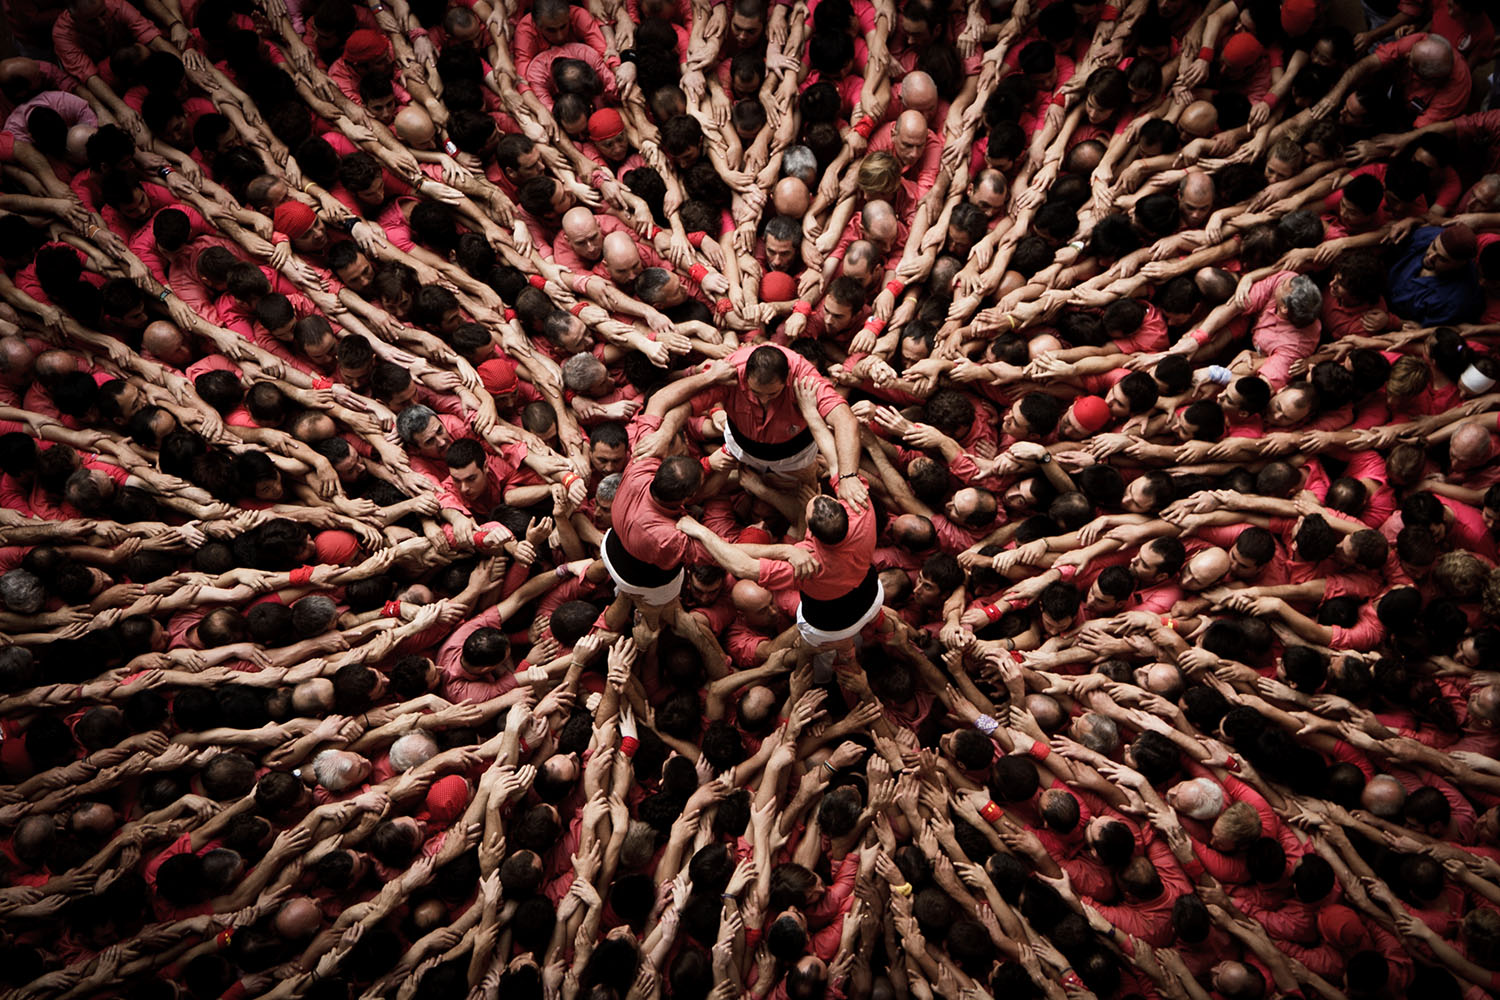 A team or 'colla' assemble the human tower in Tarragona, Spain.  Hundreds of people clamber over each other to form a human tower in these remarkable images. Teams of up to 500 men, women and children compete to build the tallest tower ñ which can be as many as ten levels tall. July 28, 2014